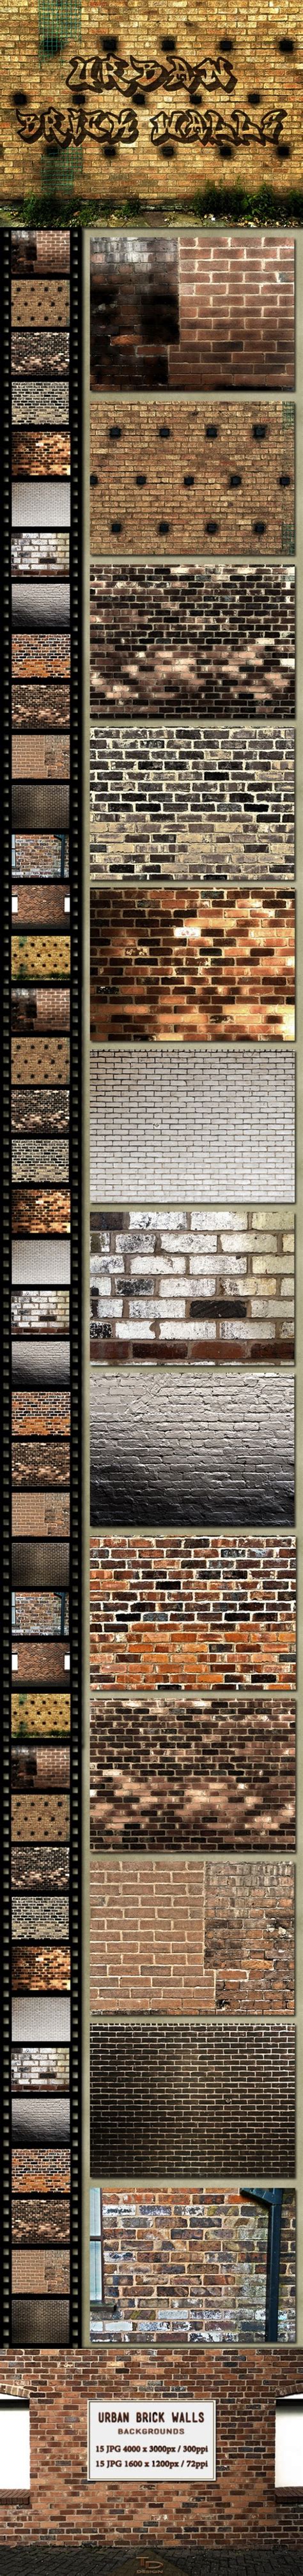 Urban Brick Wall Backgrounds Tanydi Art And Design